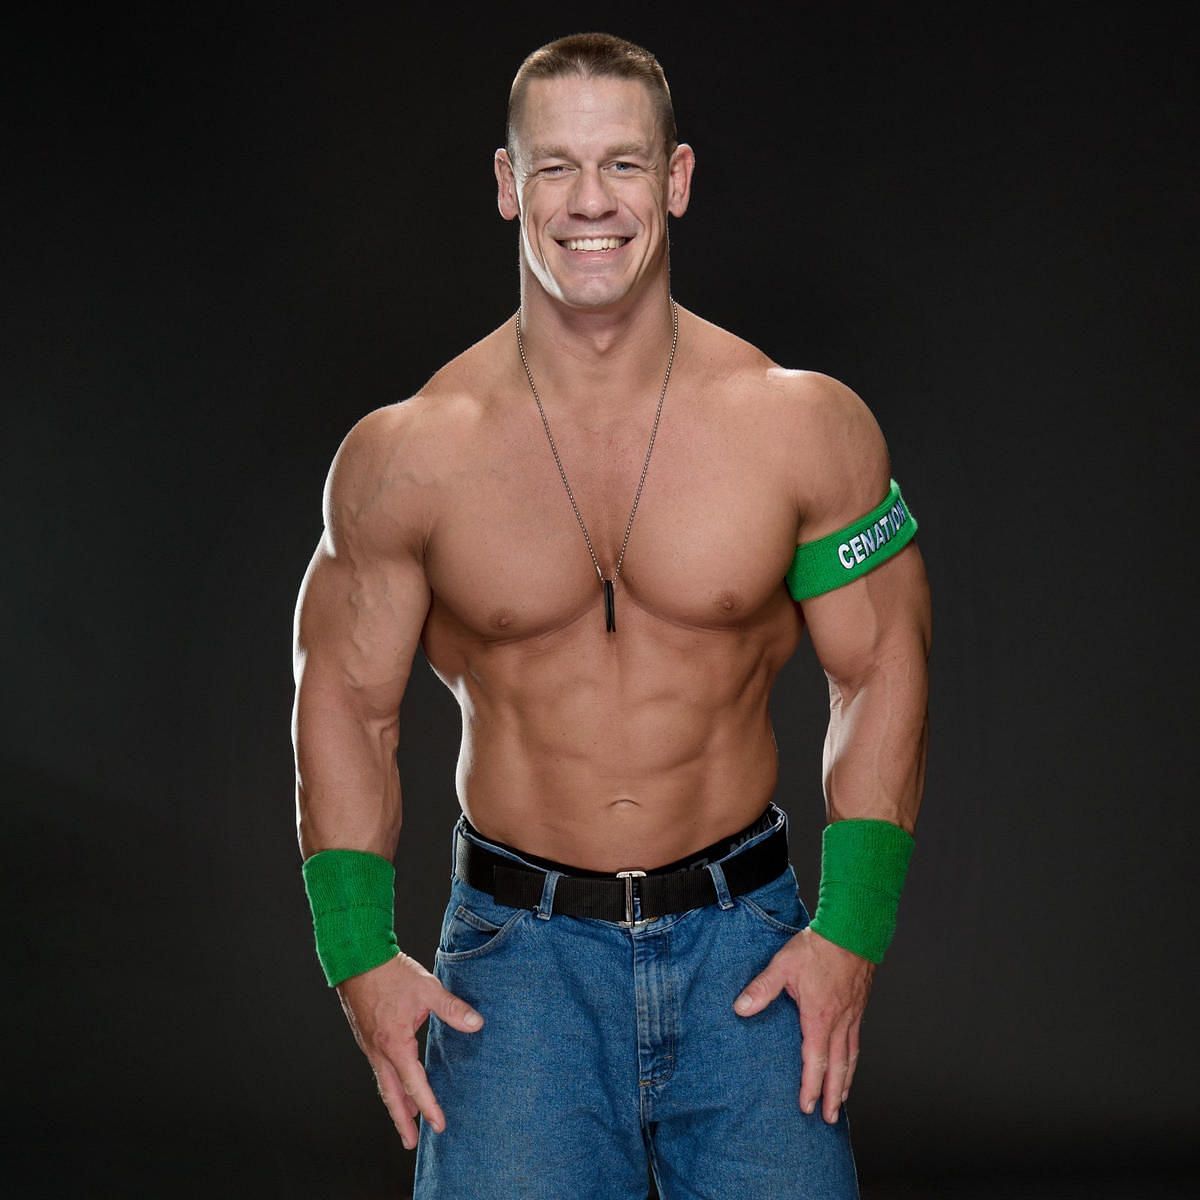 “Stunning Compilation of John Cena Images in Full 4K Resolution – Over 999 Top-Quality Shots”